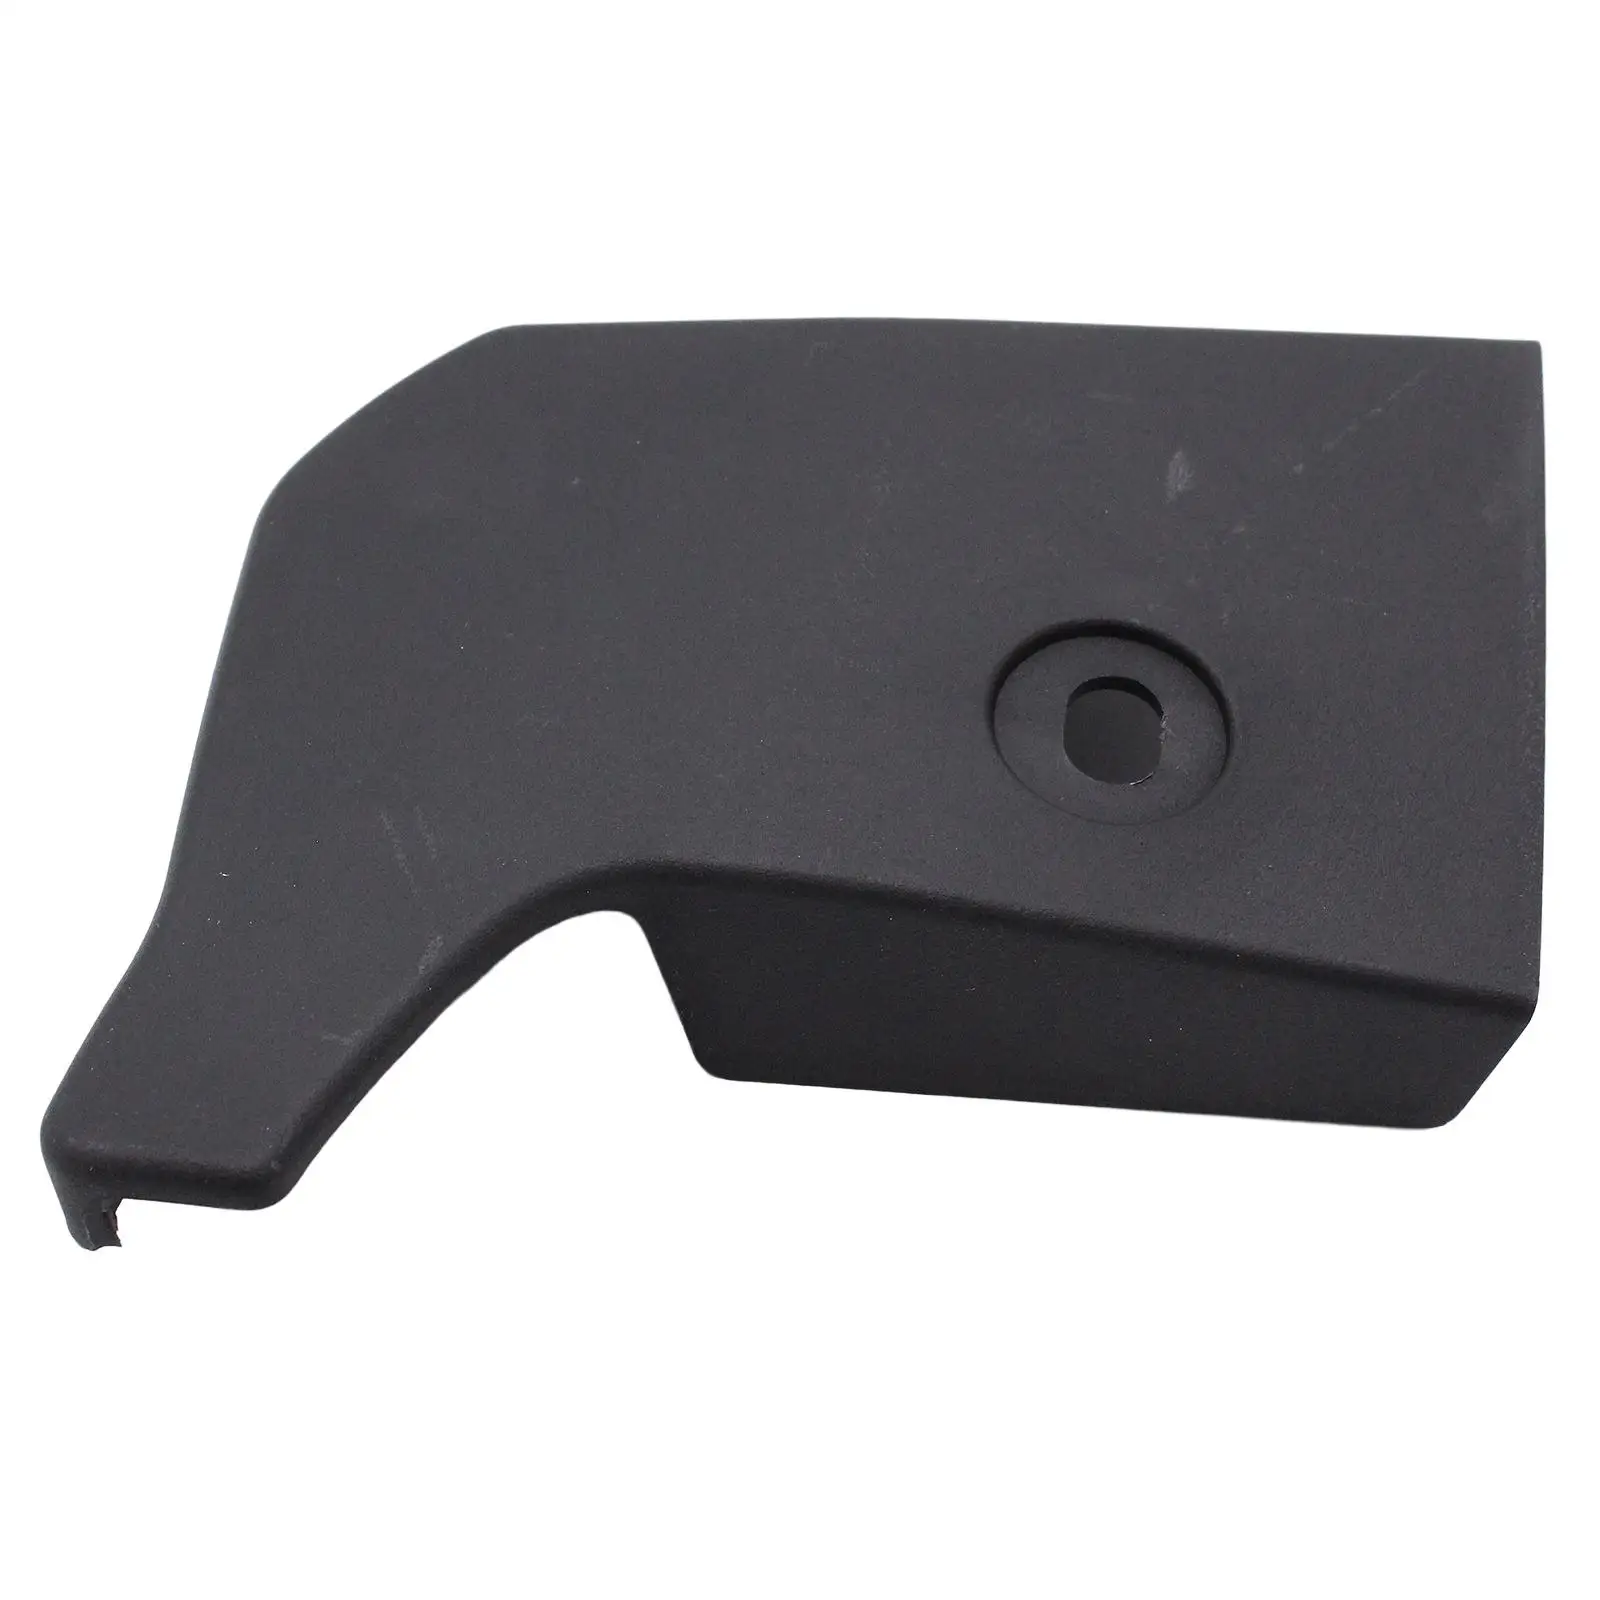 Auto Front Left Side Skirt End Cover Caps, C1Bj10175AC for Ford Fiesta MK8 Parts.